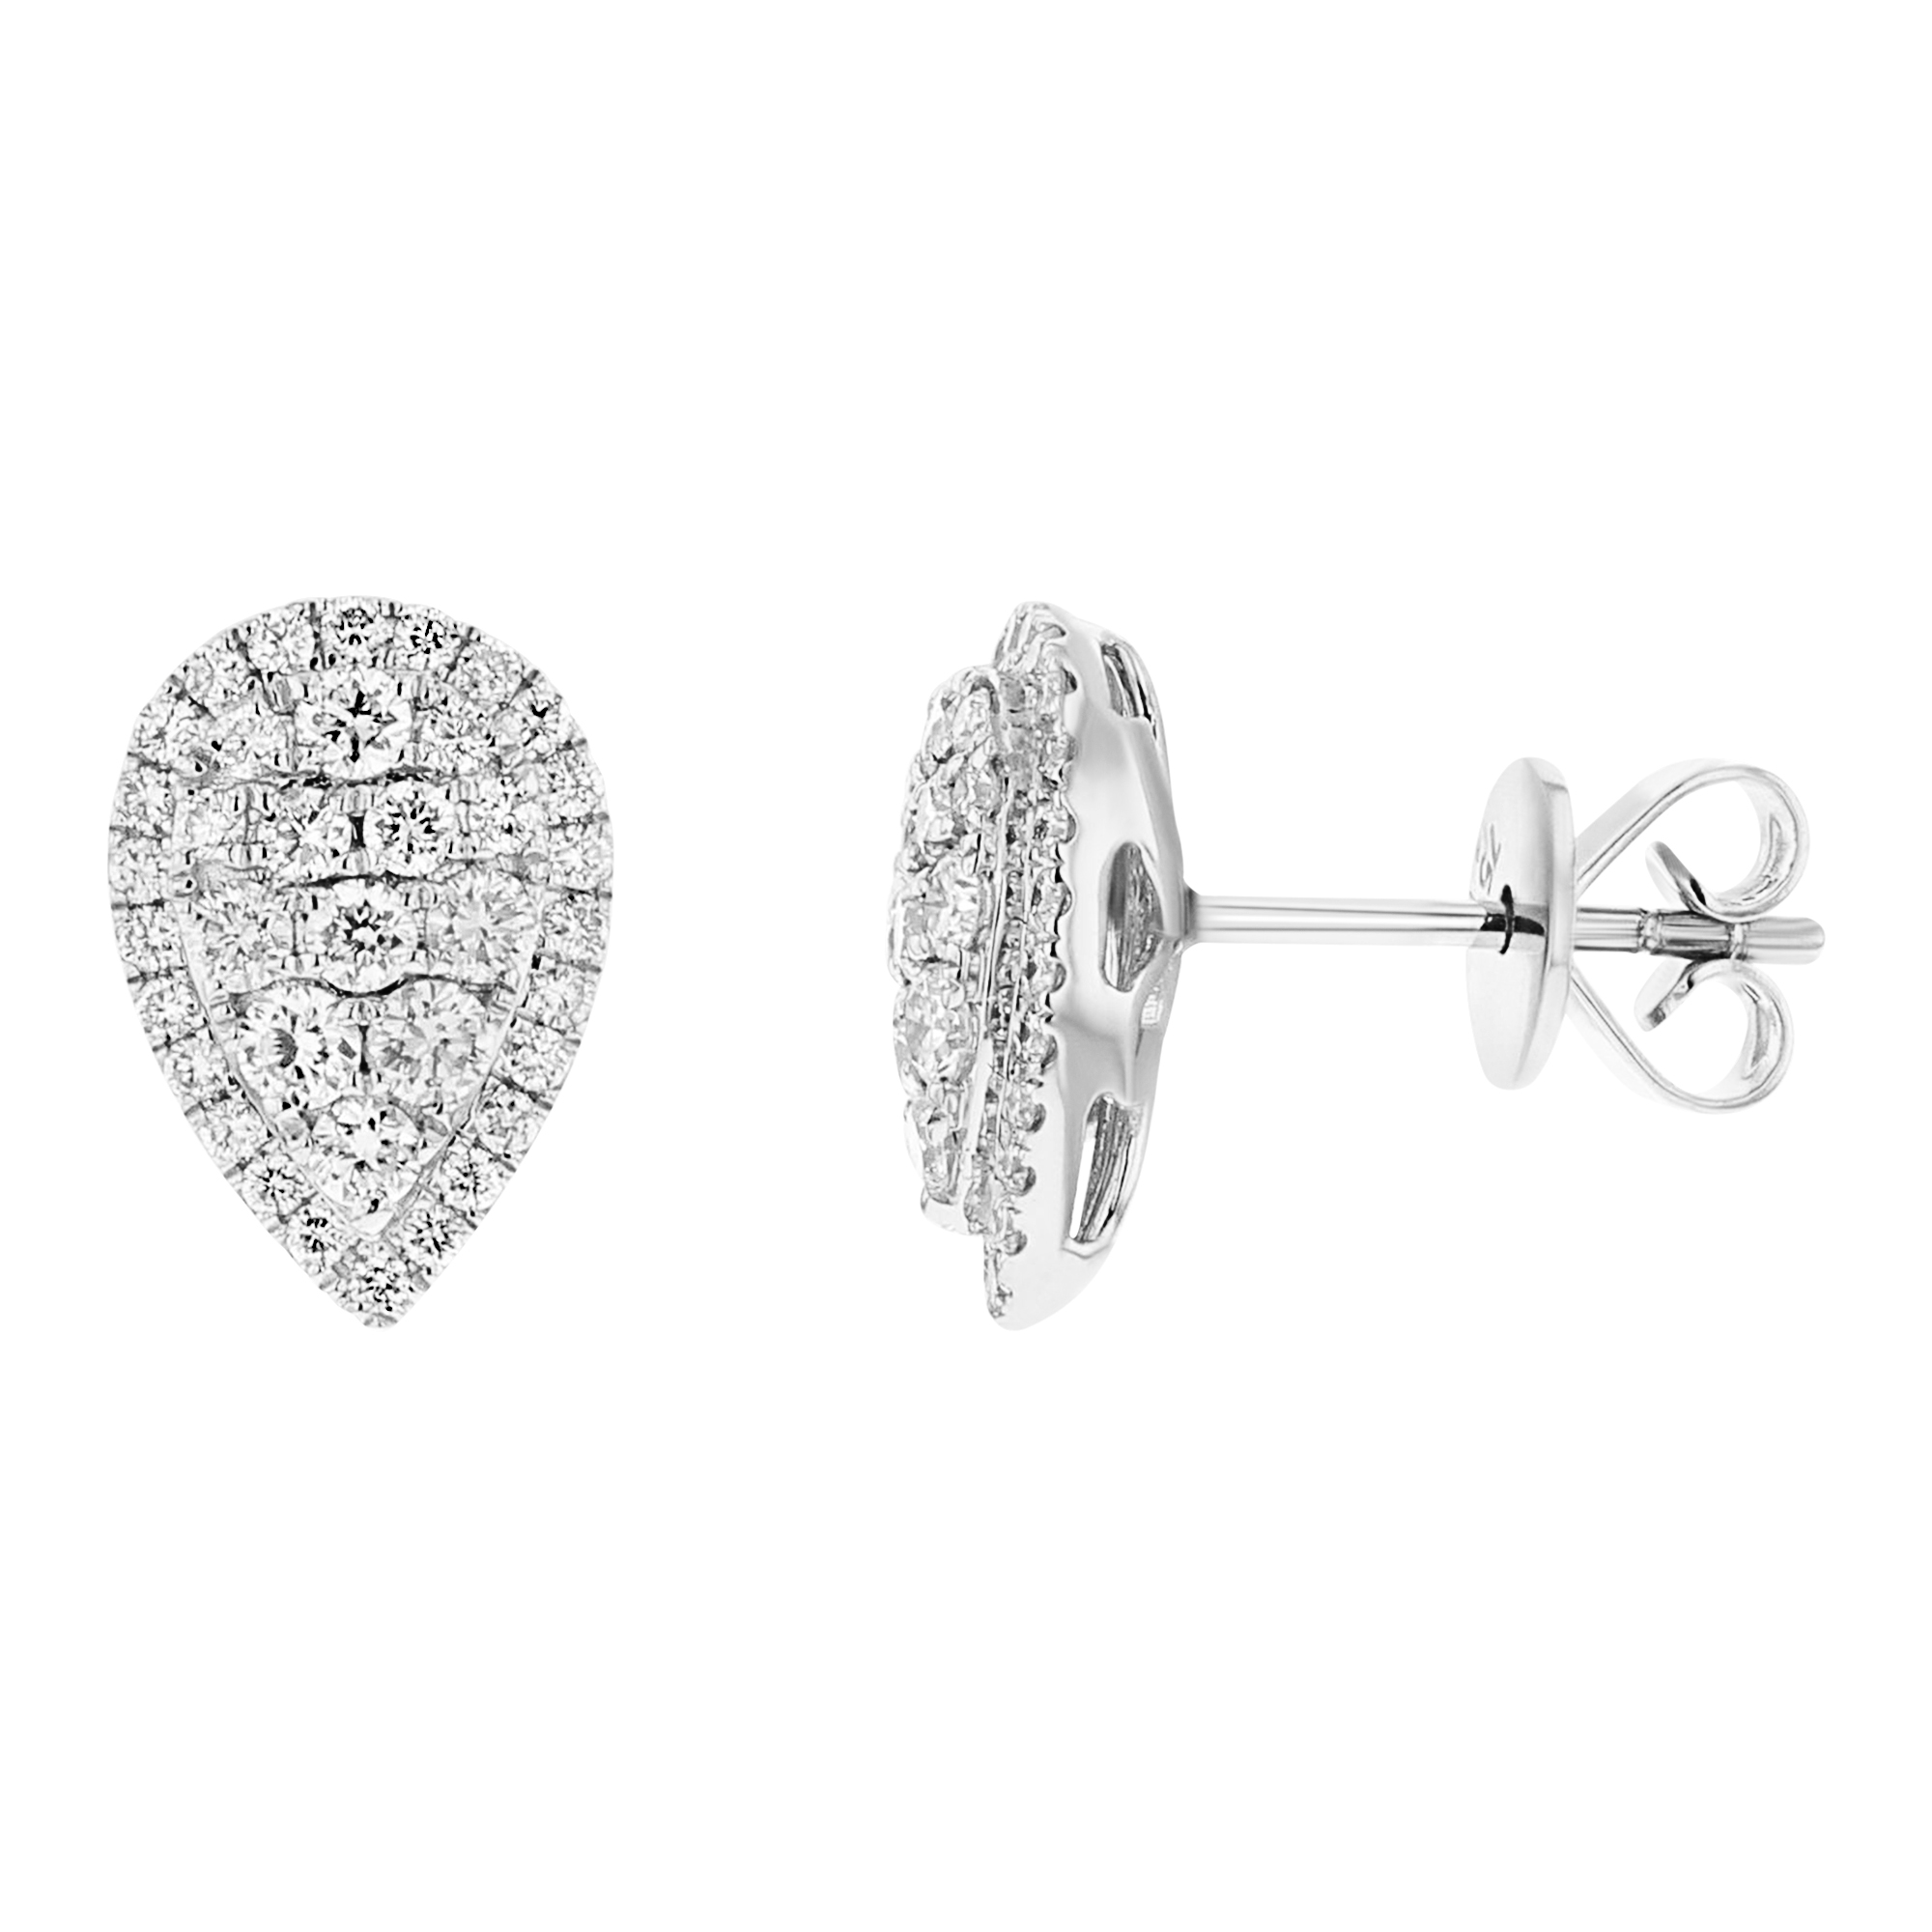 View 0.80ctw Diamond Pear Shaped Cluster Stud Earrings in 18k Whiite Gold